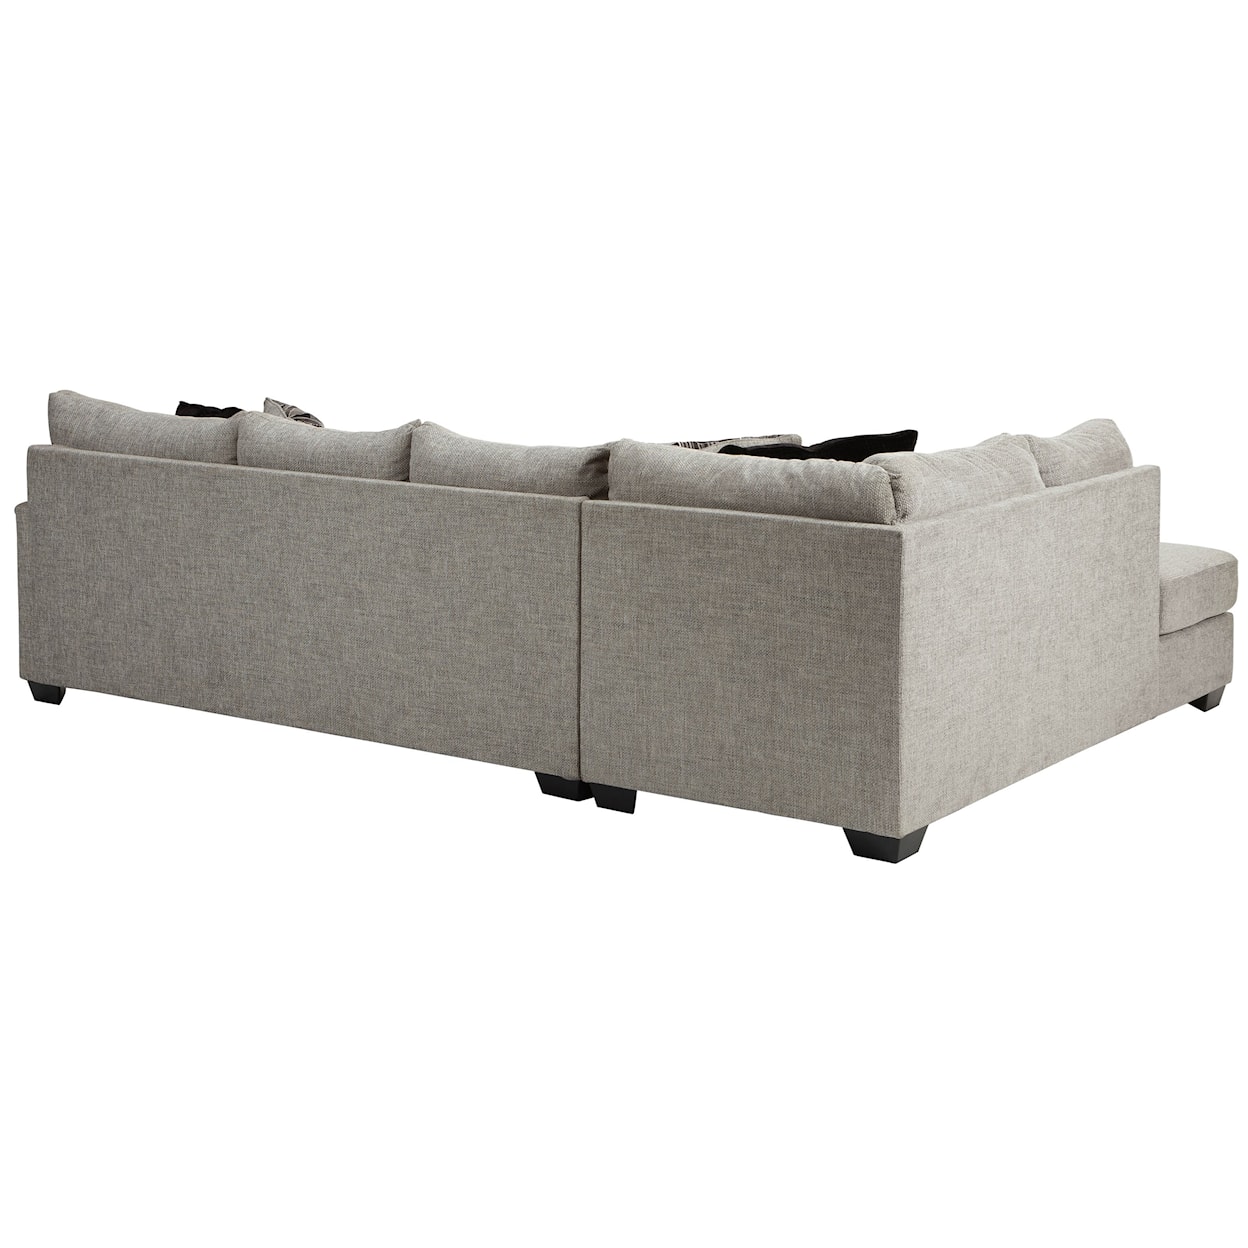 JB King LUCCA Sectional